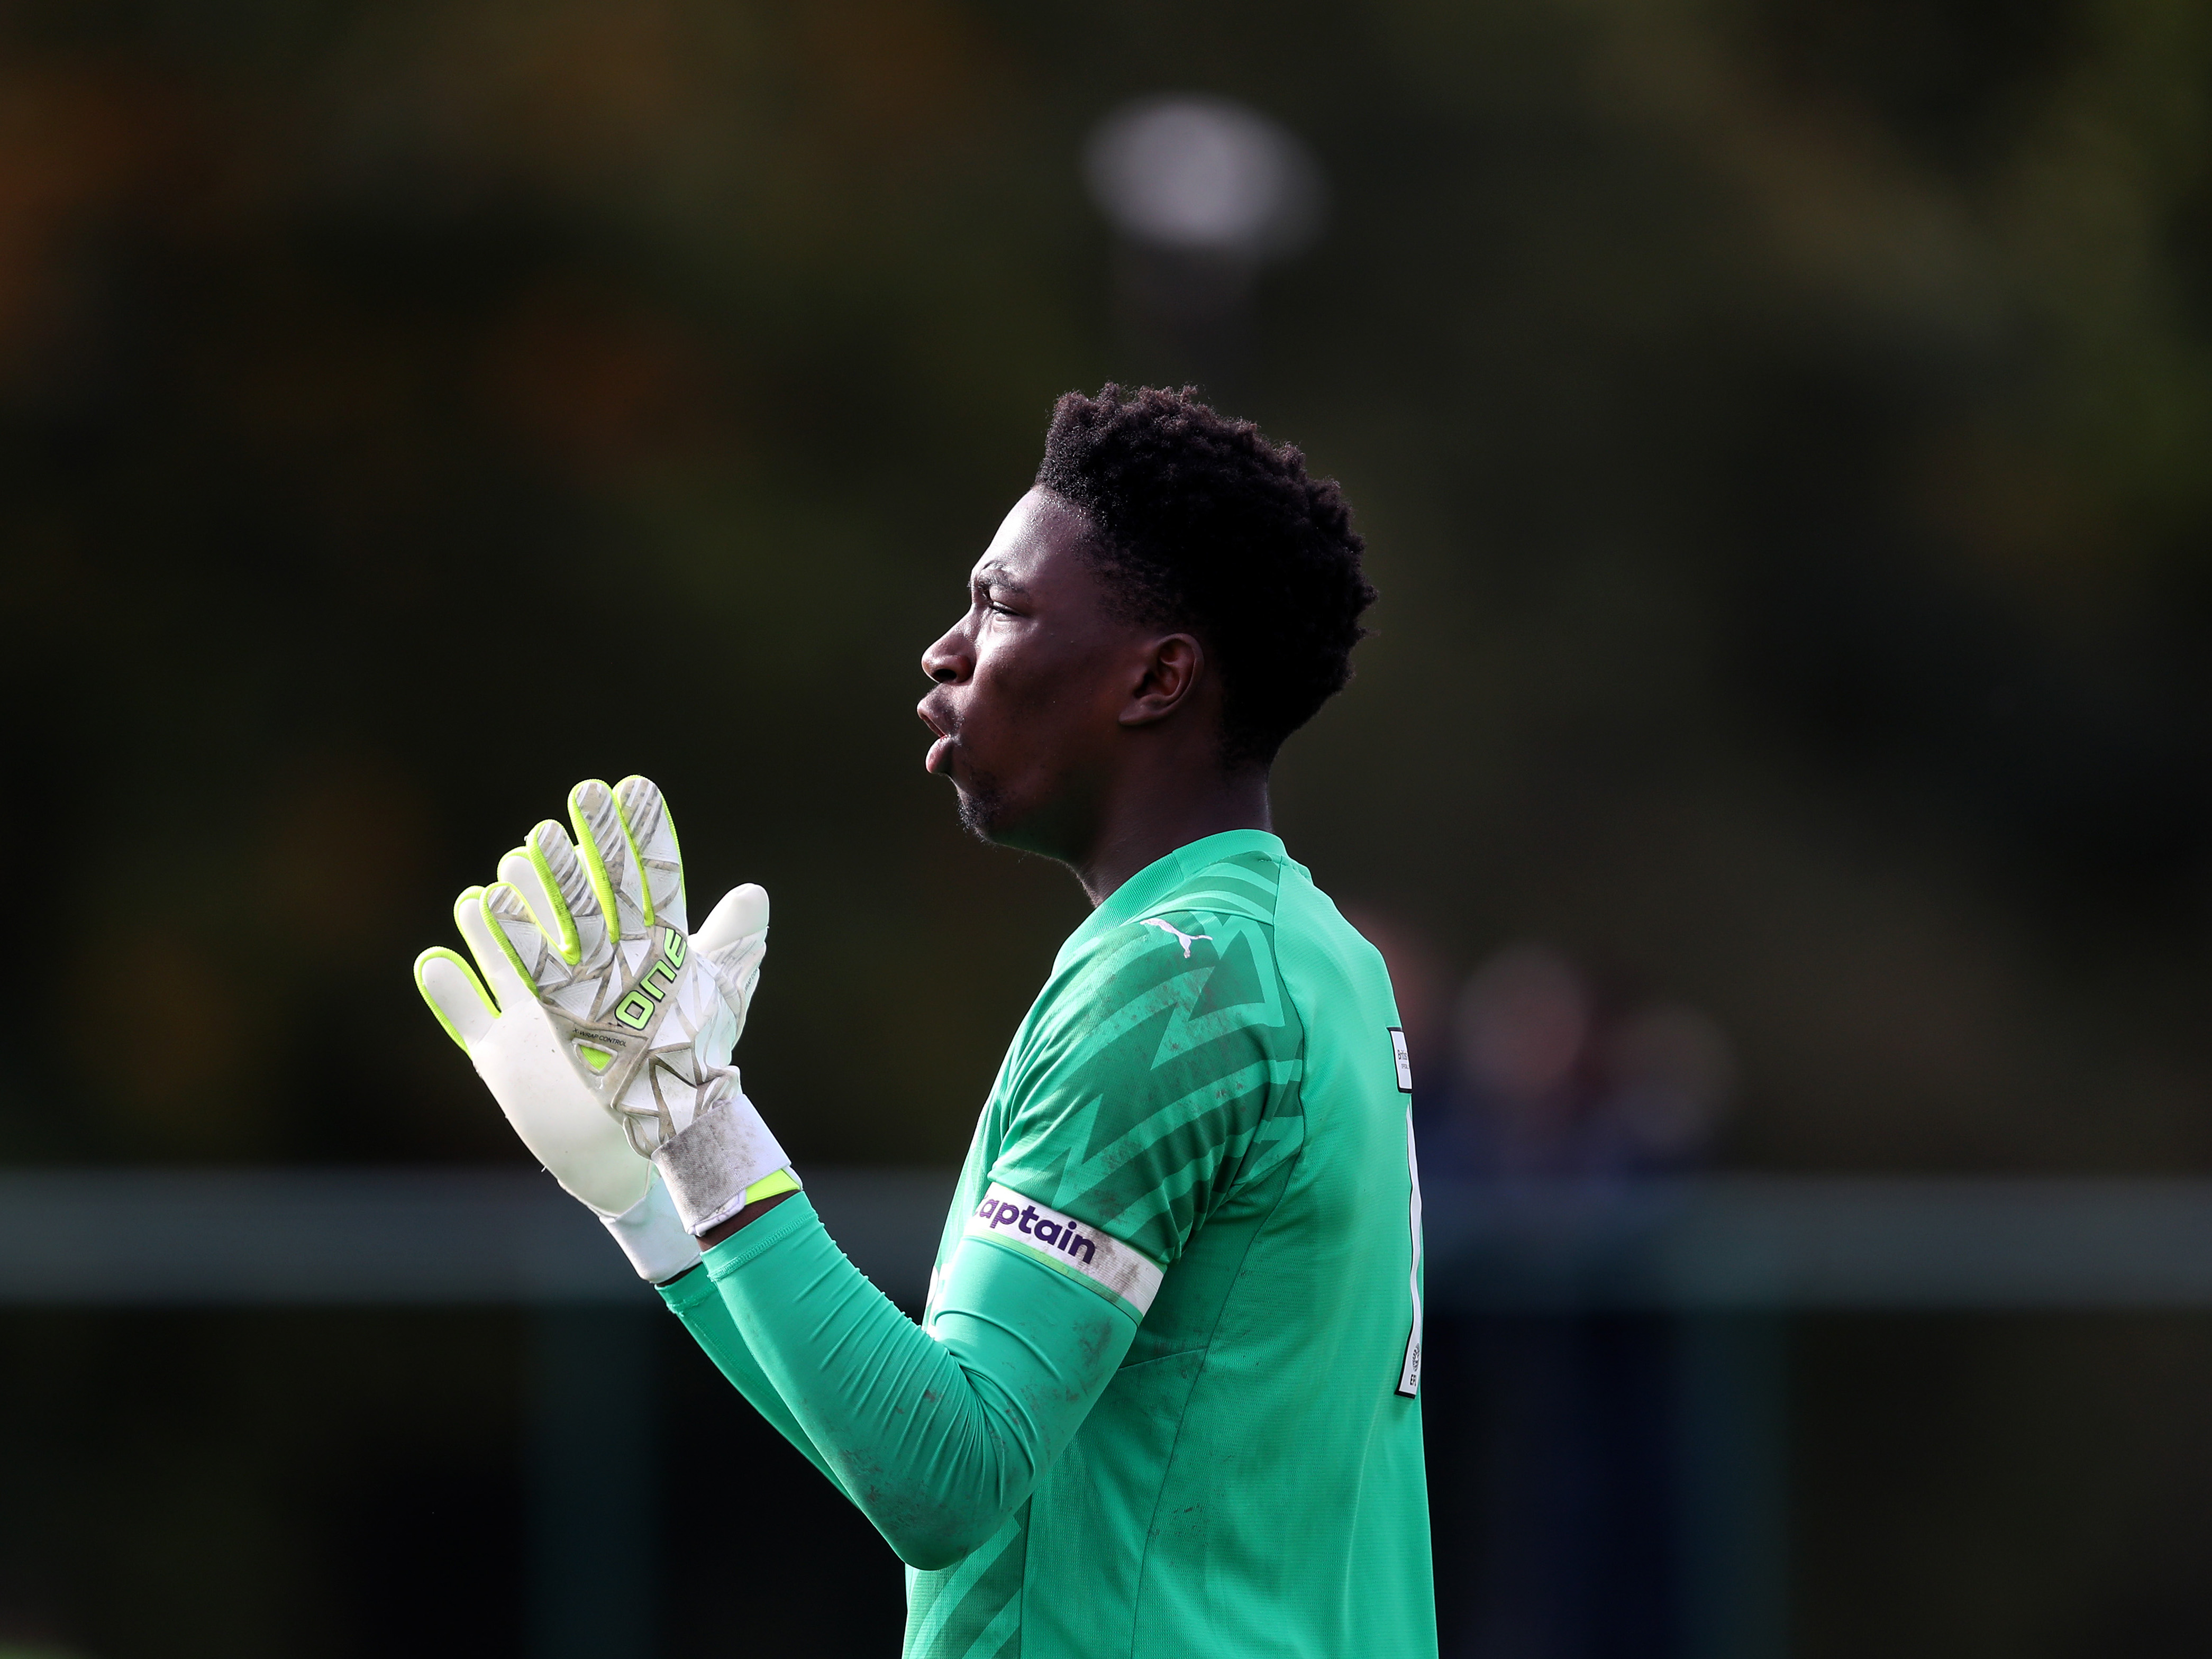 A photo of Albion academy goalkeeper Ben Cisse shouting commands during a PL2 game at a sunny club training ground